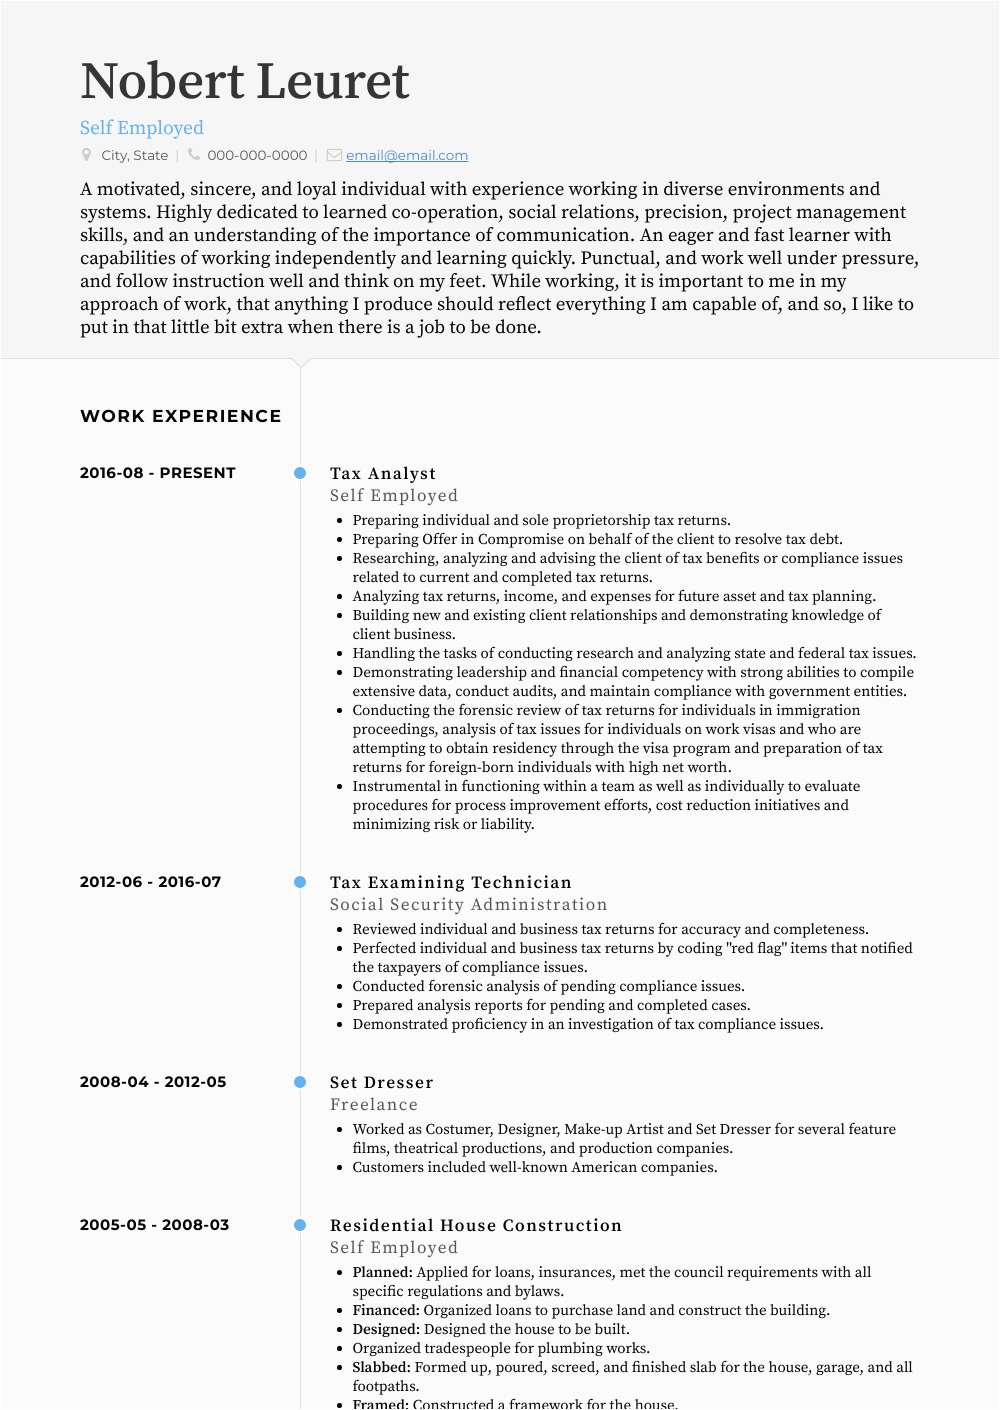 Sample Resume Of Self Employed Person Resumes for Self Employed Mryn ism